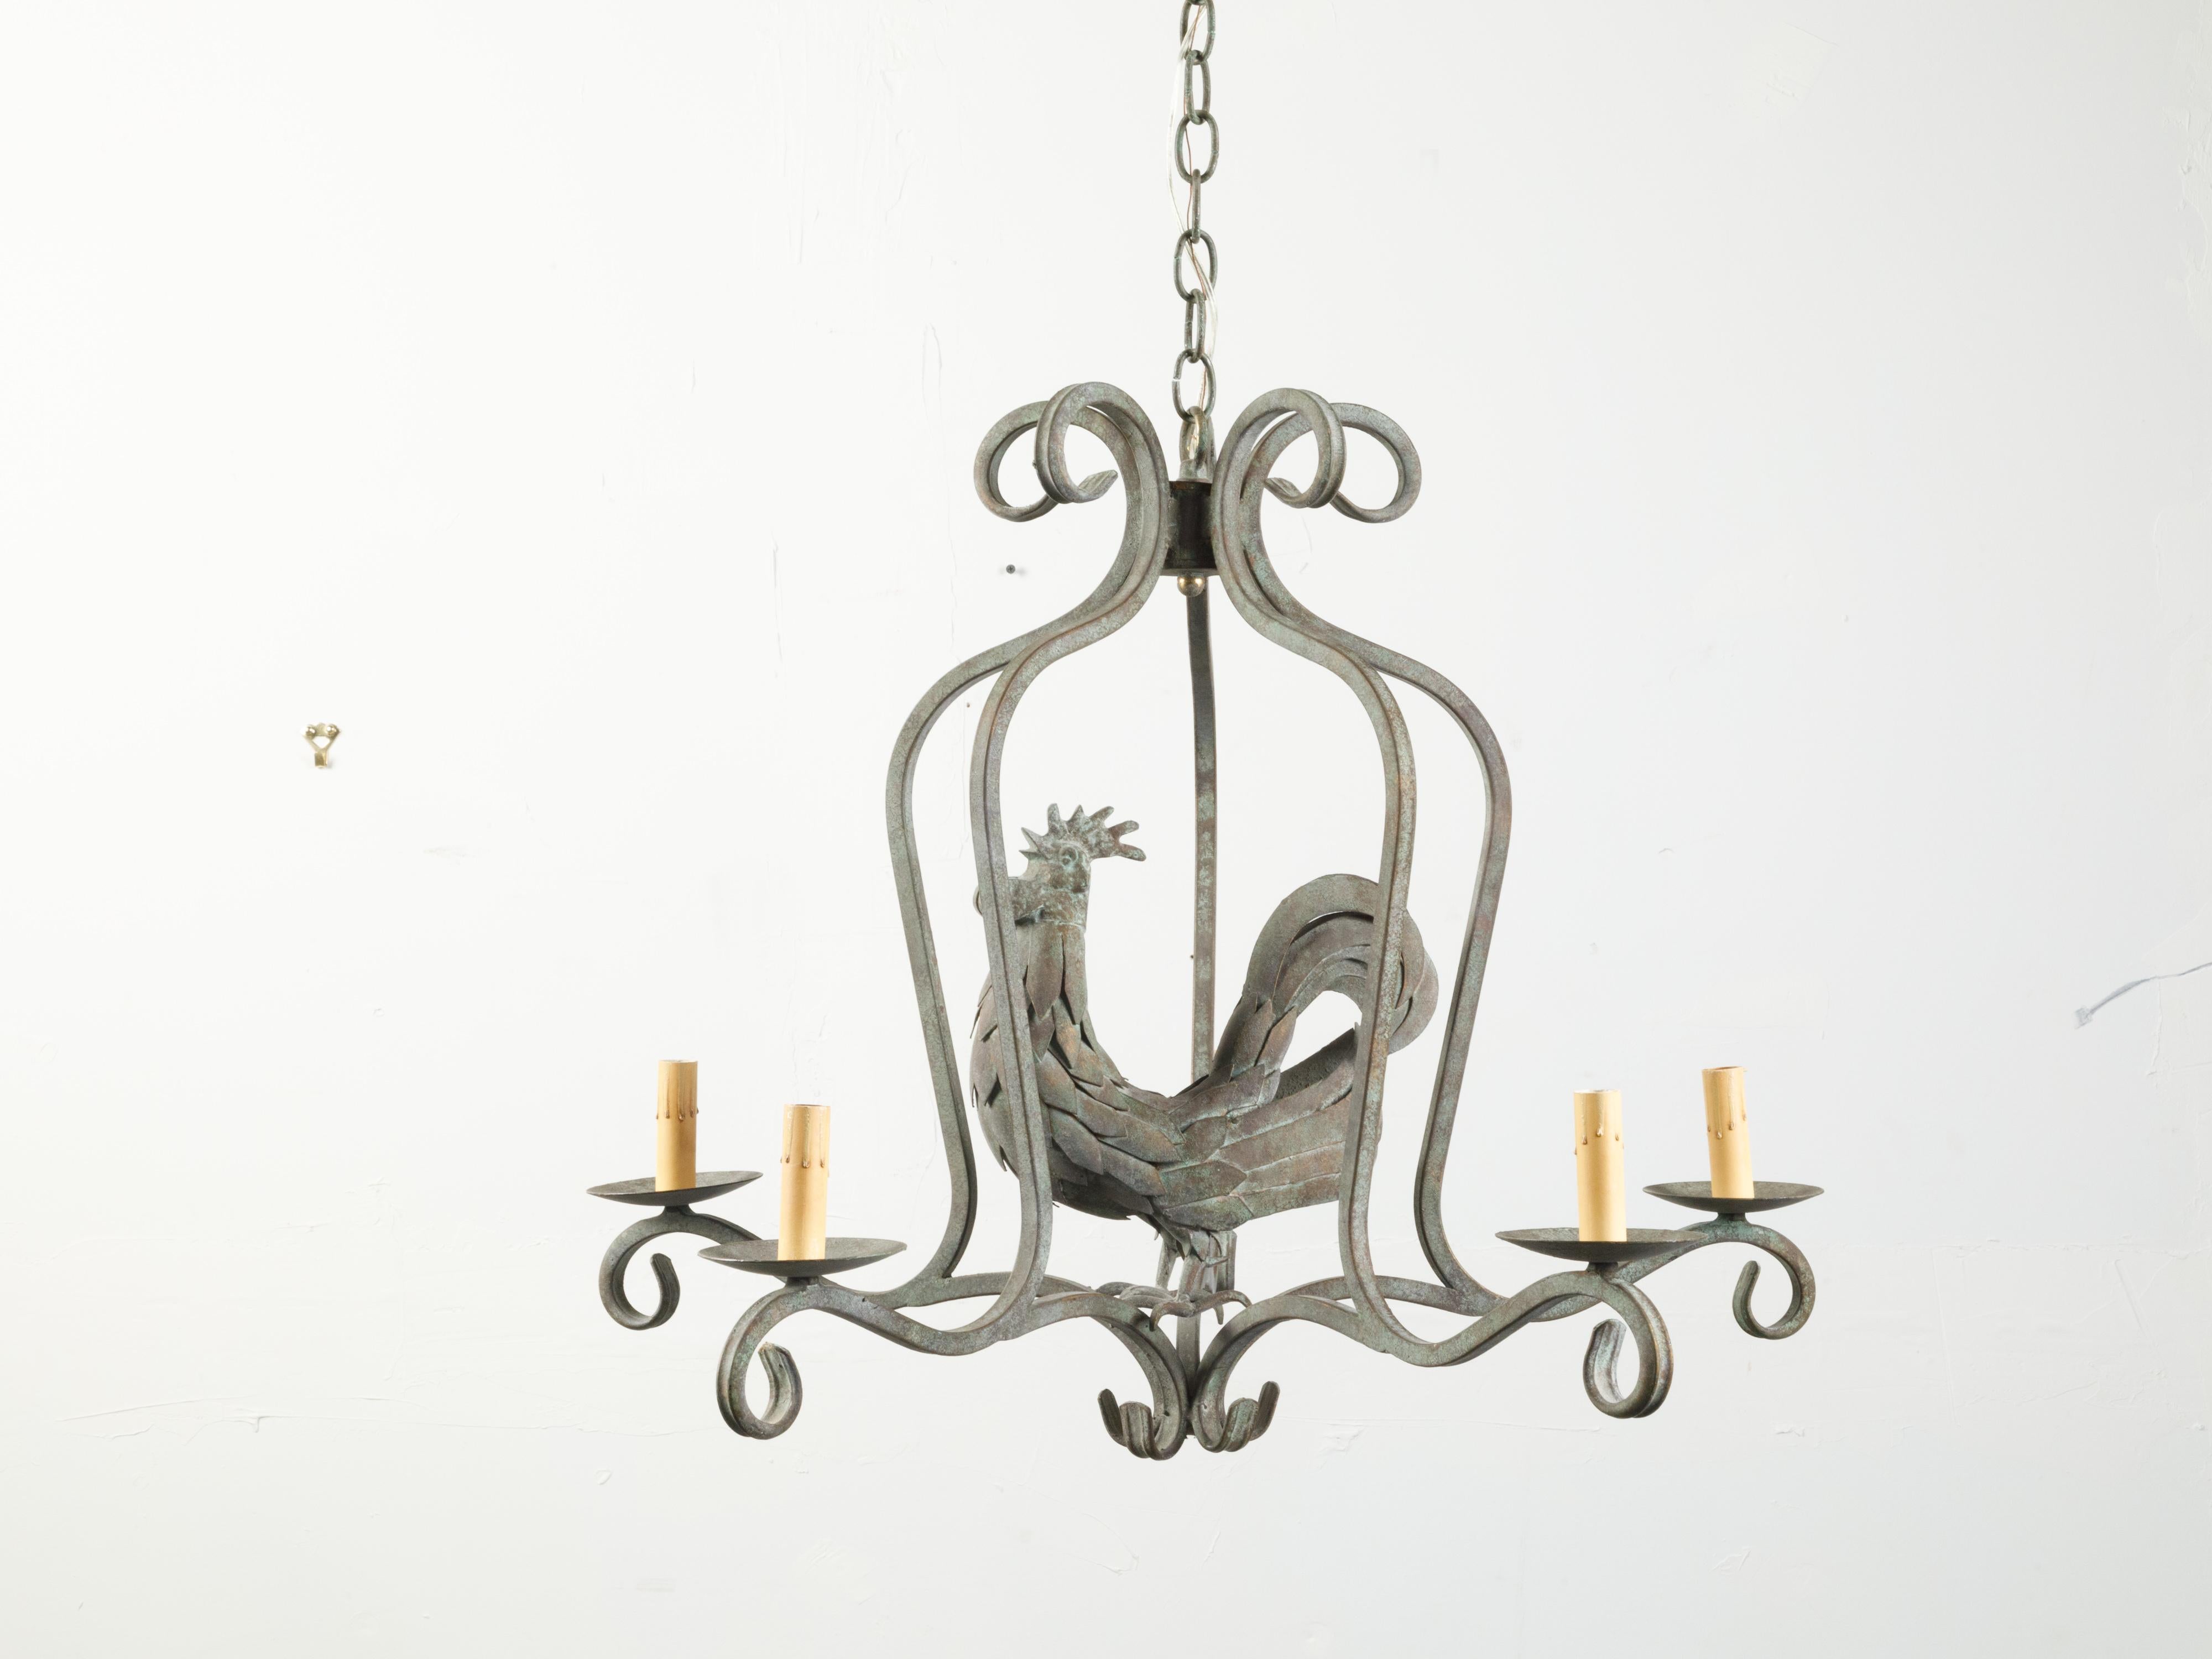 French Midcentury Metal Rooster Five-Light Chandelier with Verdigris Patina For Sale 4